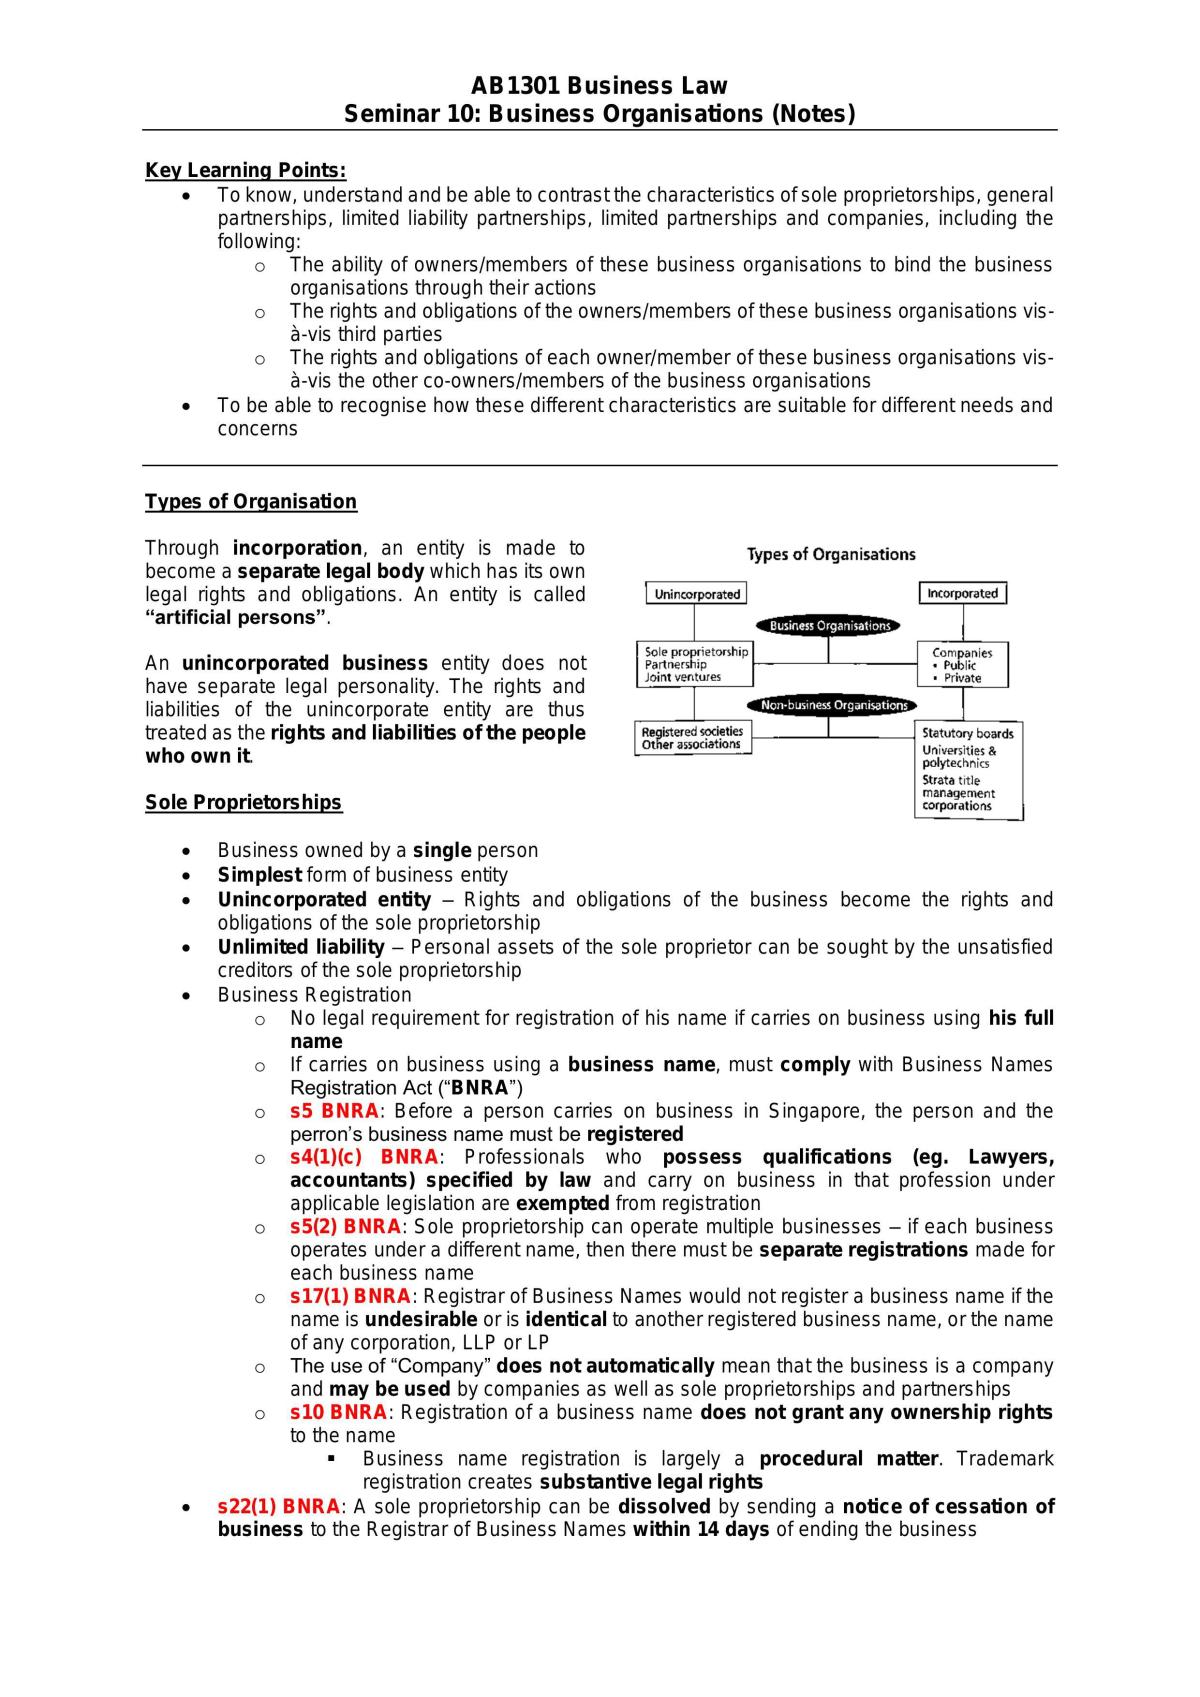 Business Organisation - Page 1